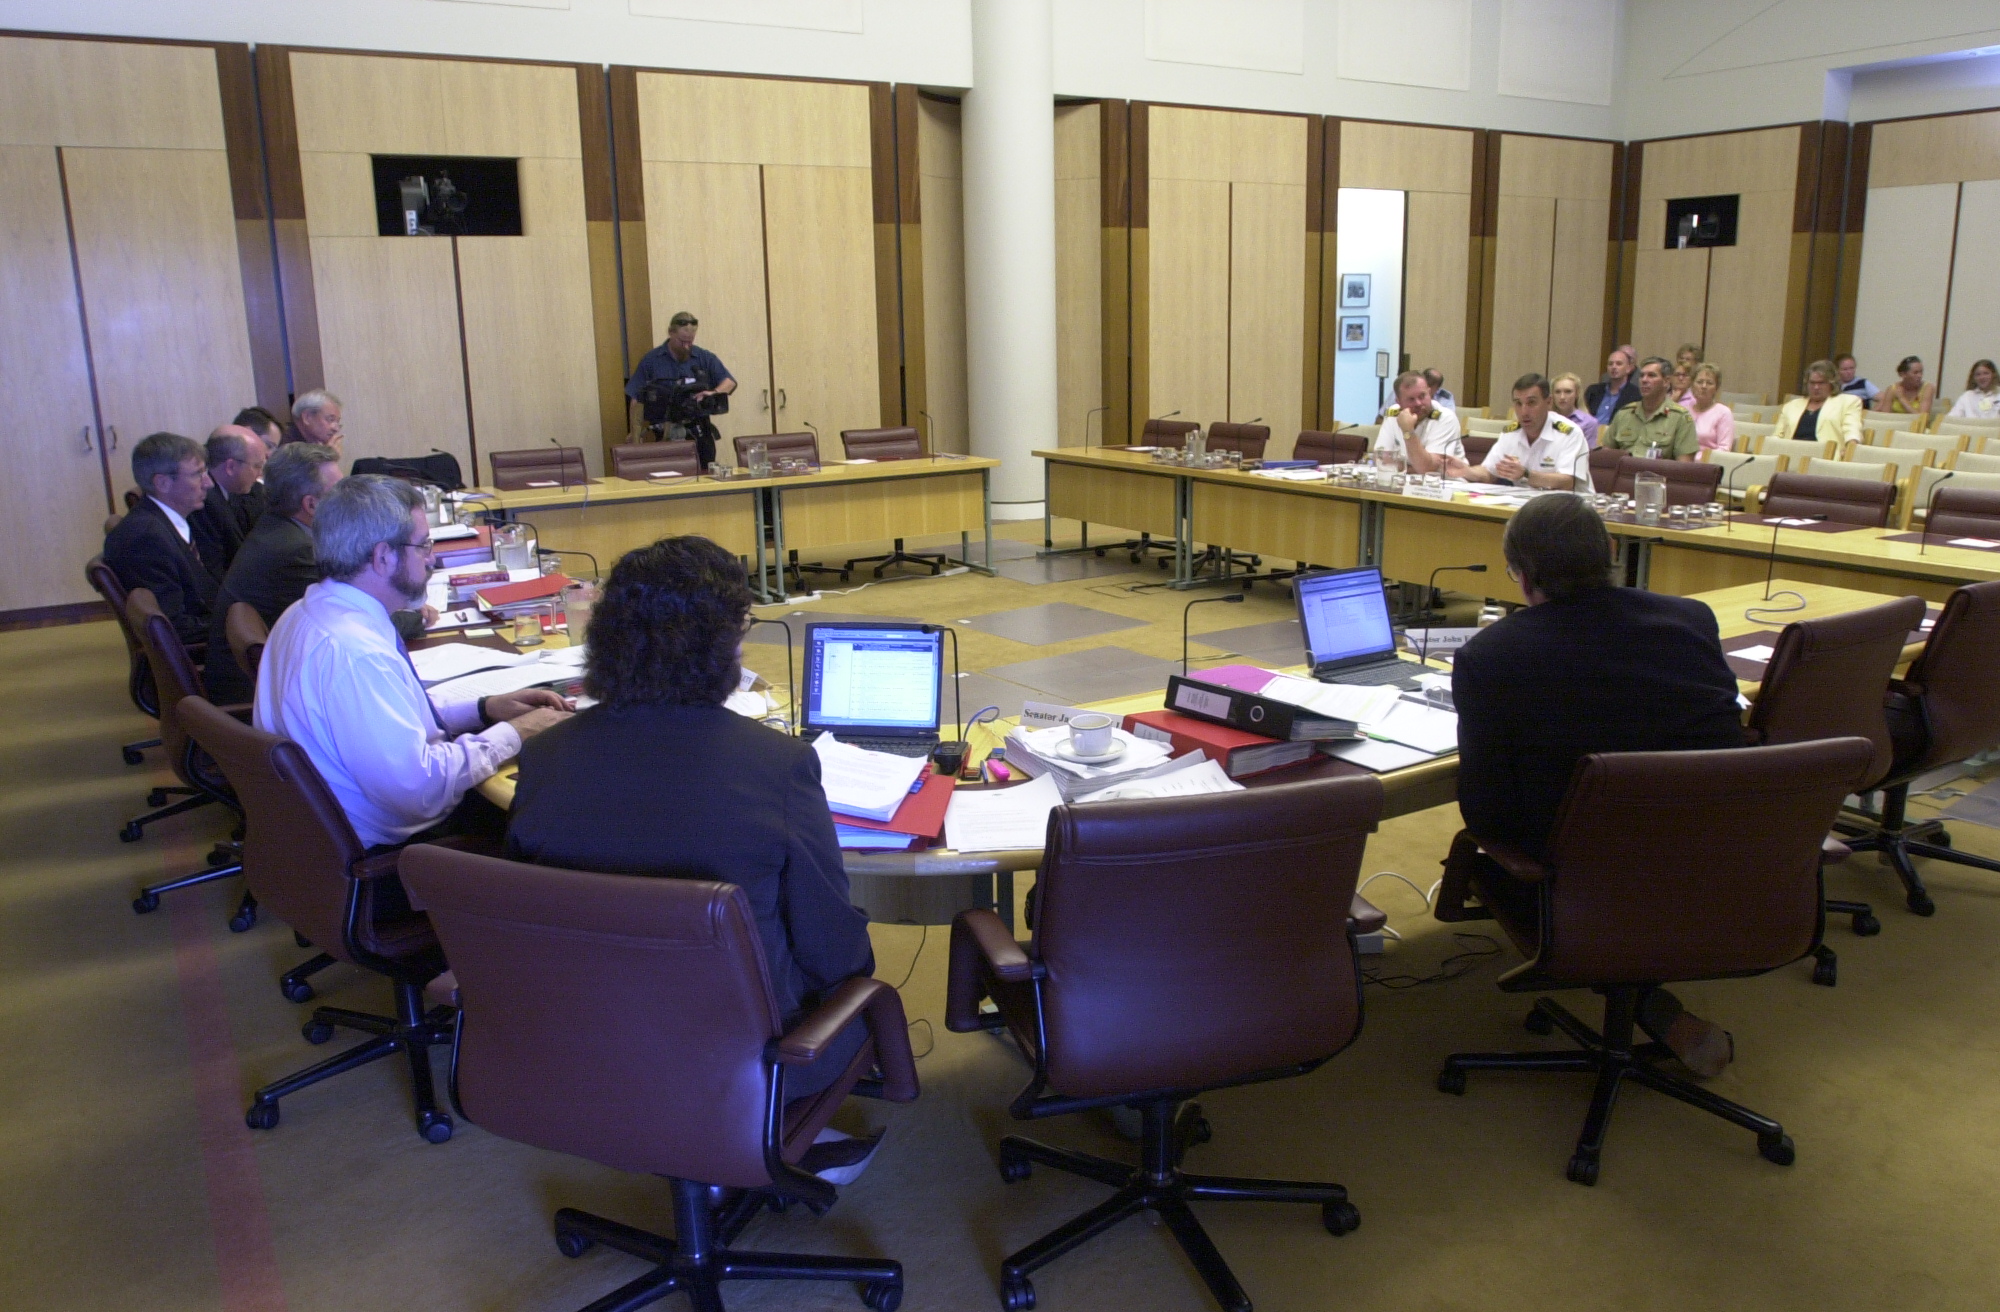 Select Committee on a Certain Maritime Incident hearing evidence from witness Commander Norman Banks at a public hearing, 26 March 2002. Seated at curved table, farthest to closest: Senators Alan Ferguson, Brett Mason and George Brandis [Deputy Chair], Brenton Holmes [Secretary], Senators Peter Cook [Chair], Andrew Bartlett, Jacinta Collins and John Faulkner. DPS Auspic.